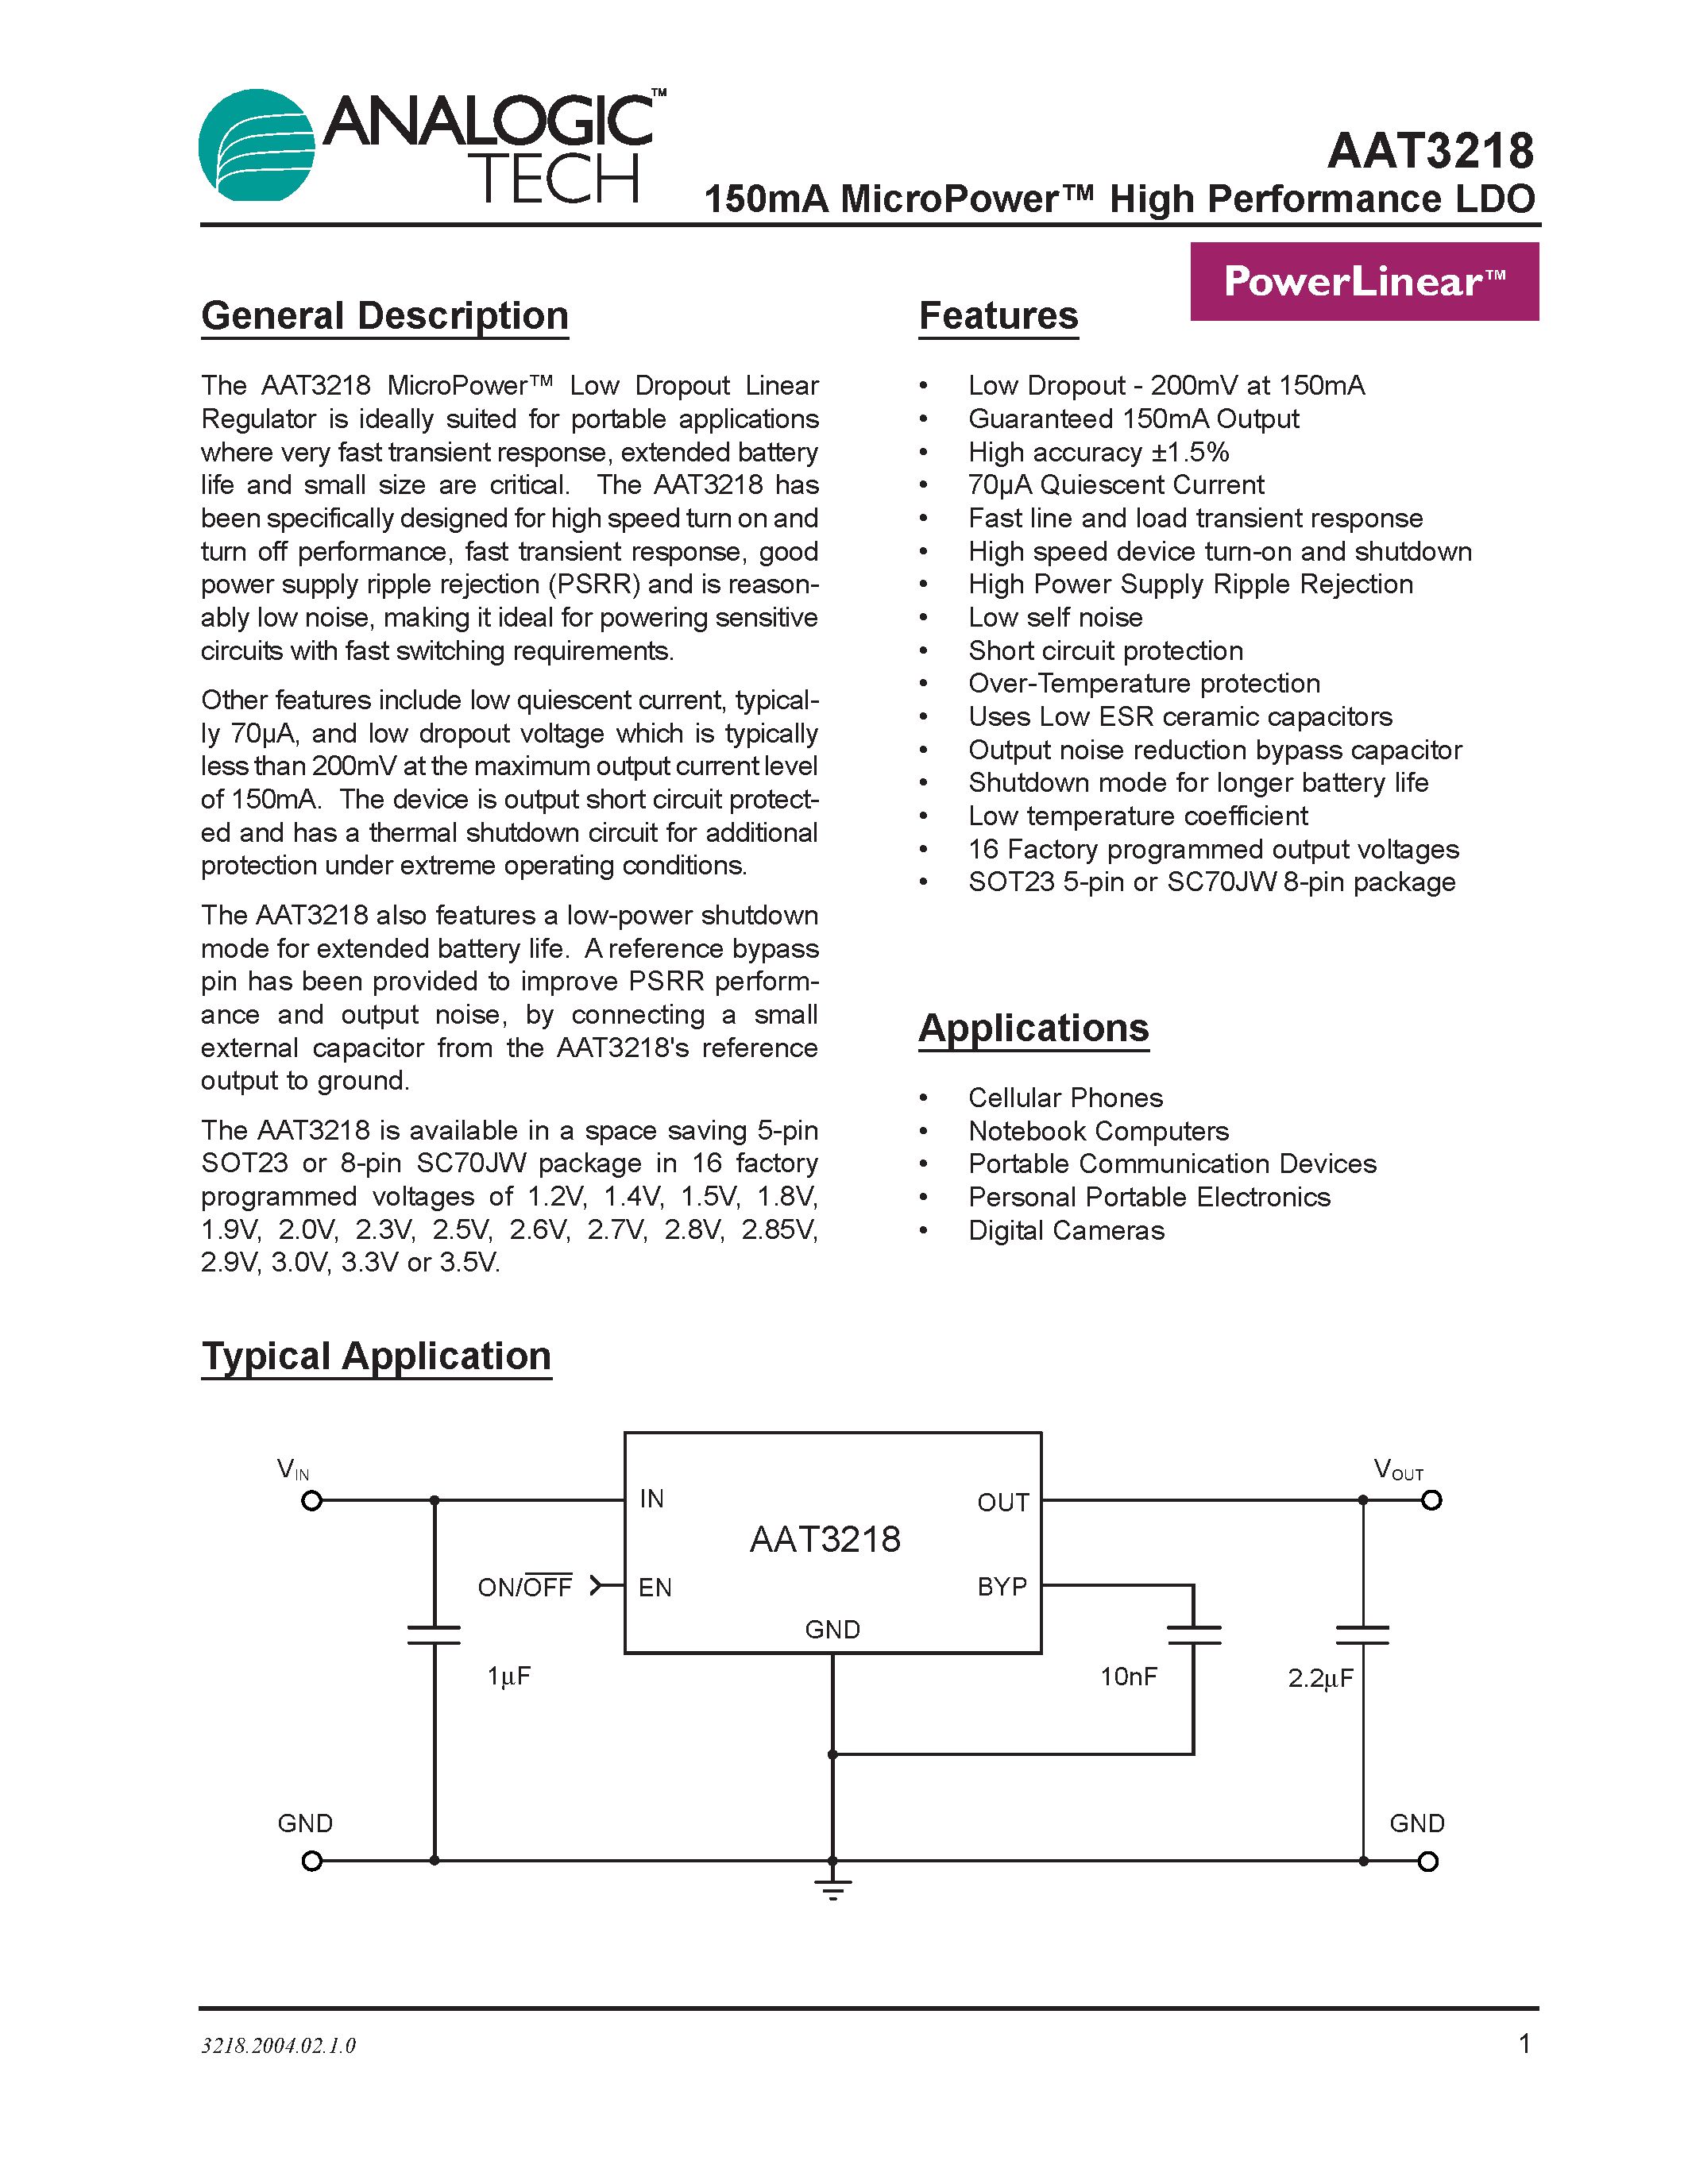 Datasheet AAT3218IGV-1.9-T1 - 150mA MicroPower High Performance LDO page 1